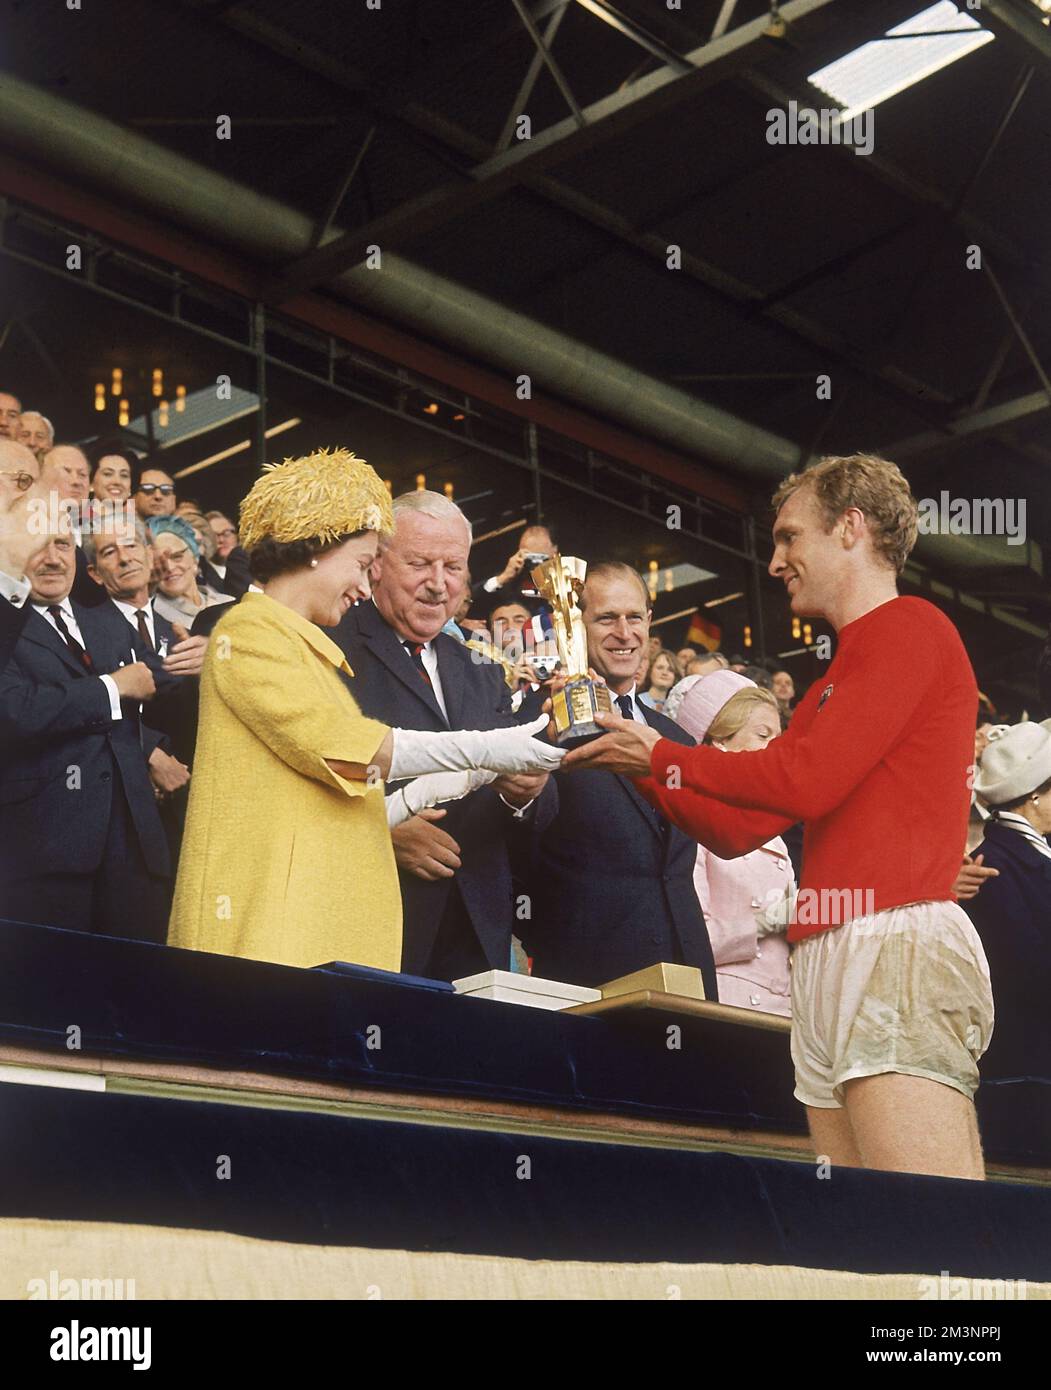 World Cup Final 1966. Queen Elizabeth II presenting the World Cup trophy (Jules Rimet Trophy) to England's Captain Bobby Moore, victorious after winning the game against West Germany at Wembley Stadium, London on July 30, 1966.         Date: 1966 Stock Photo